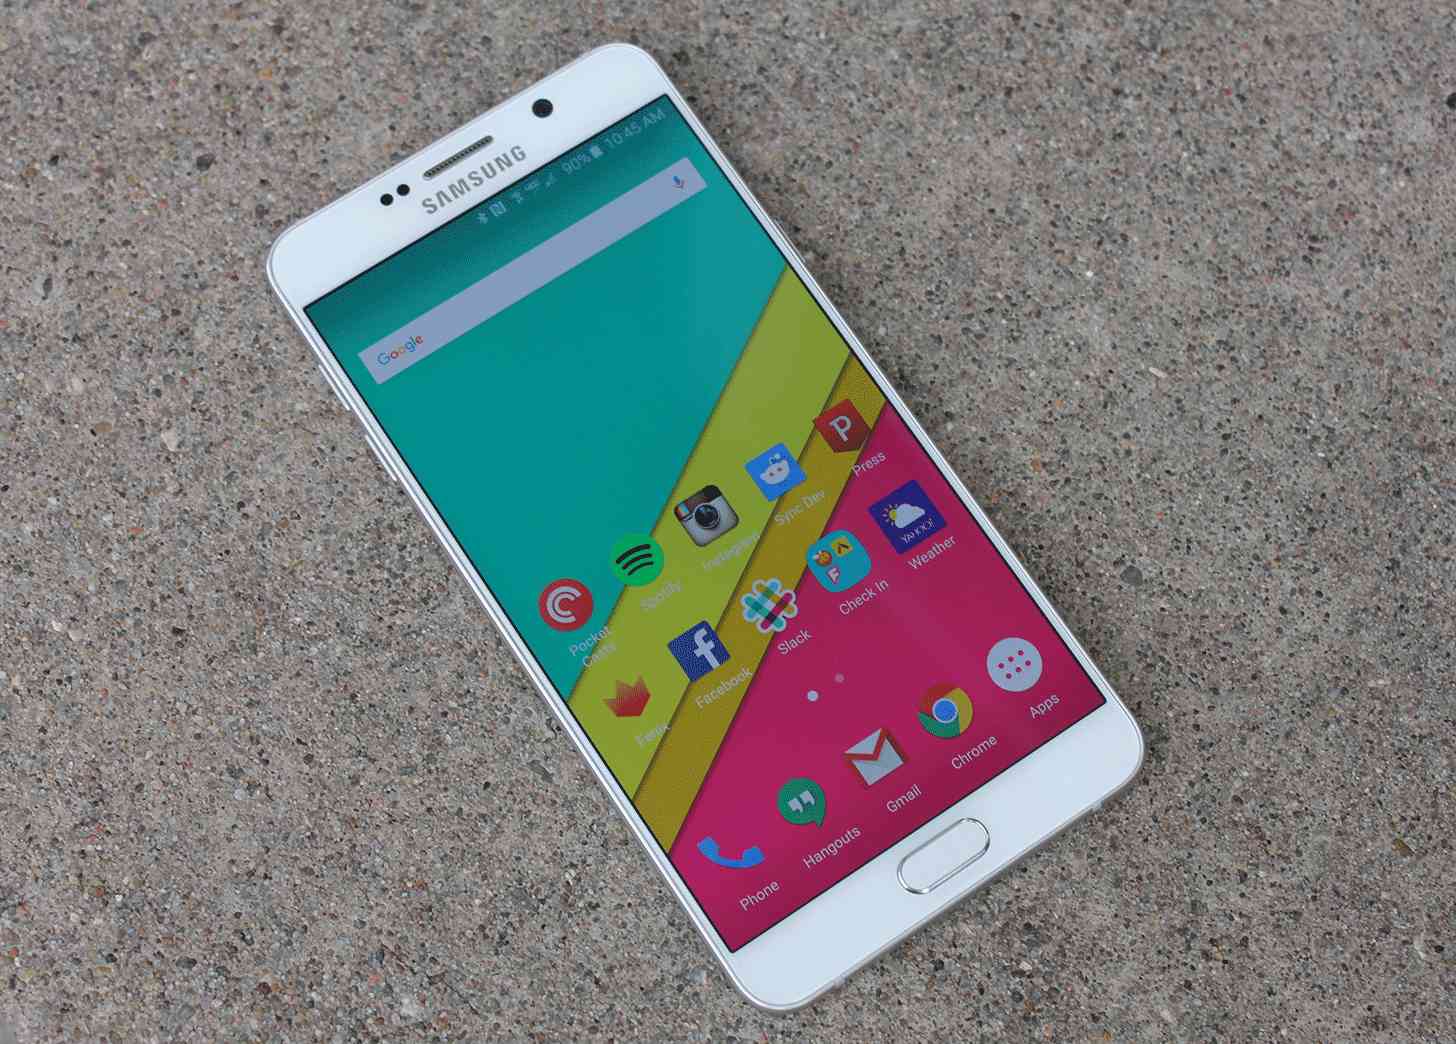 Samsung Galaxy Note 5 white review